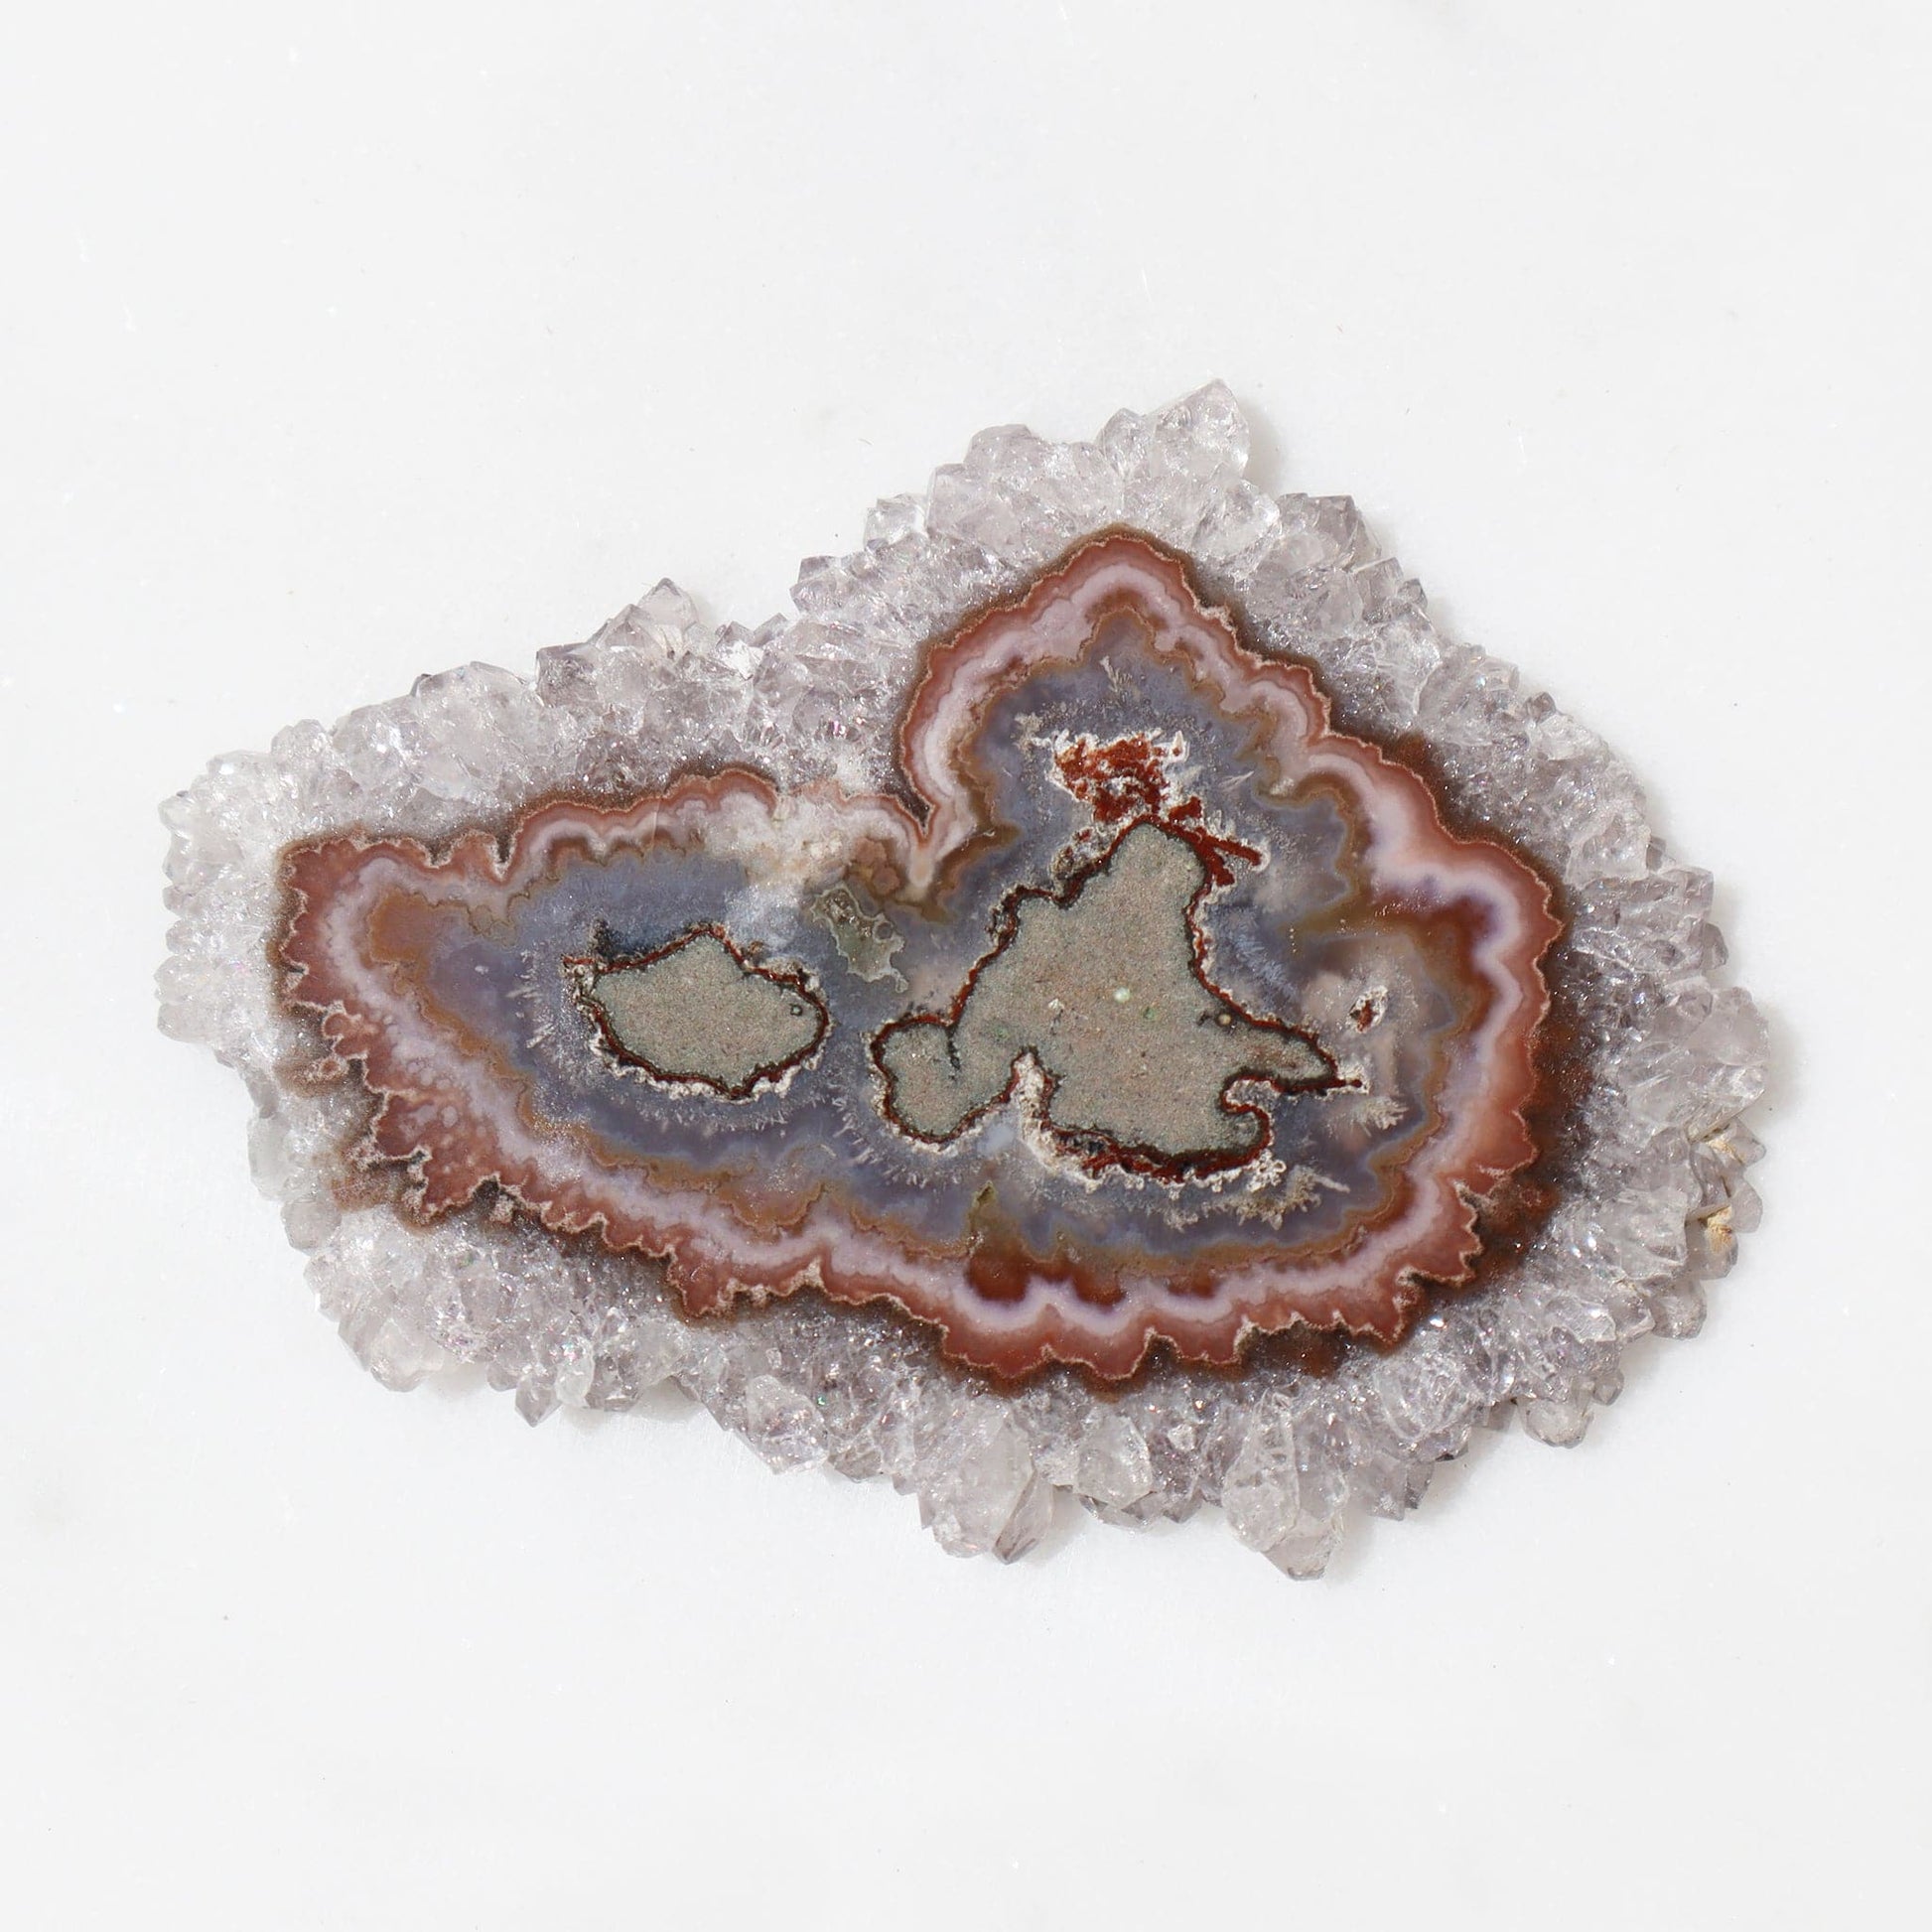 Handsome Earth Tones Amethyst Stalactite - Deepest Earth